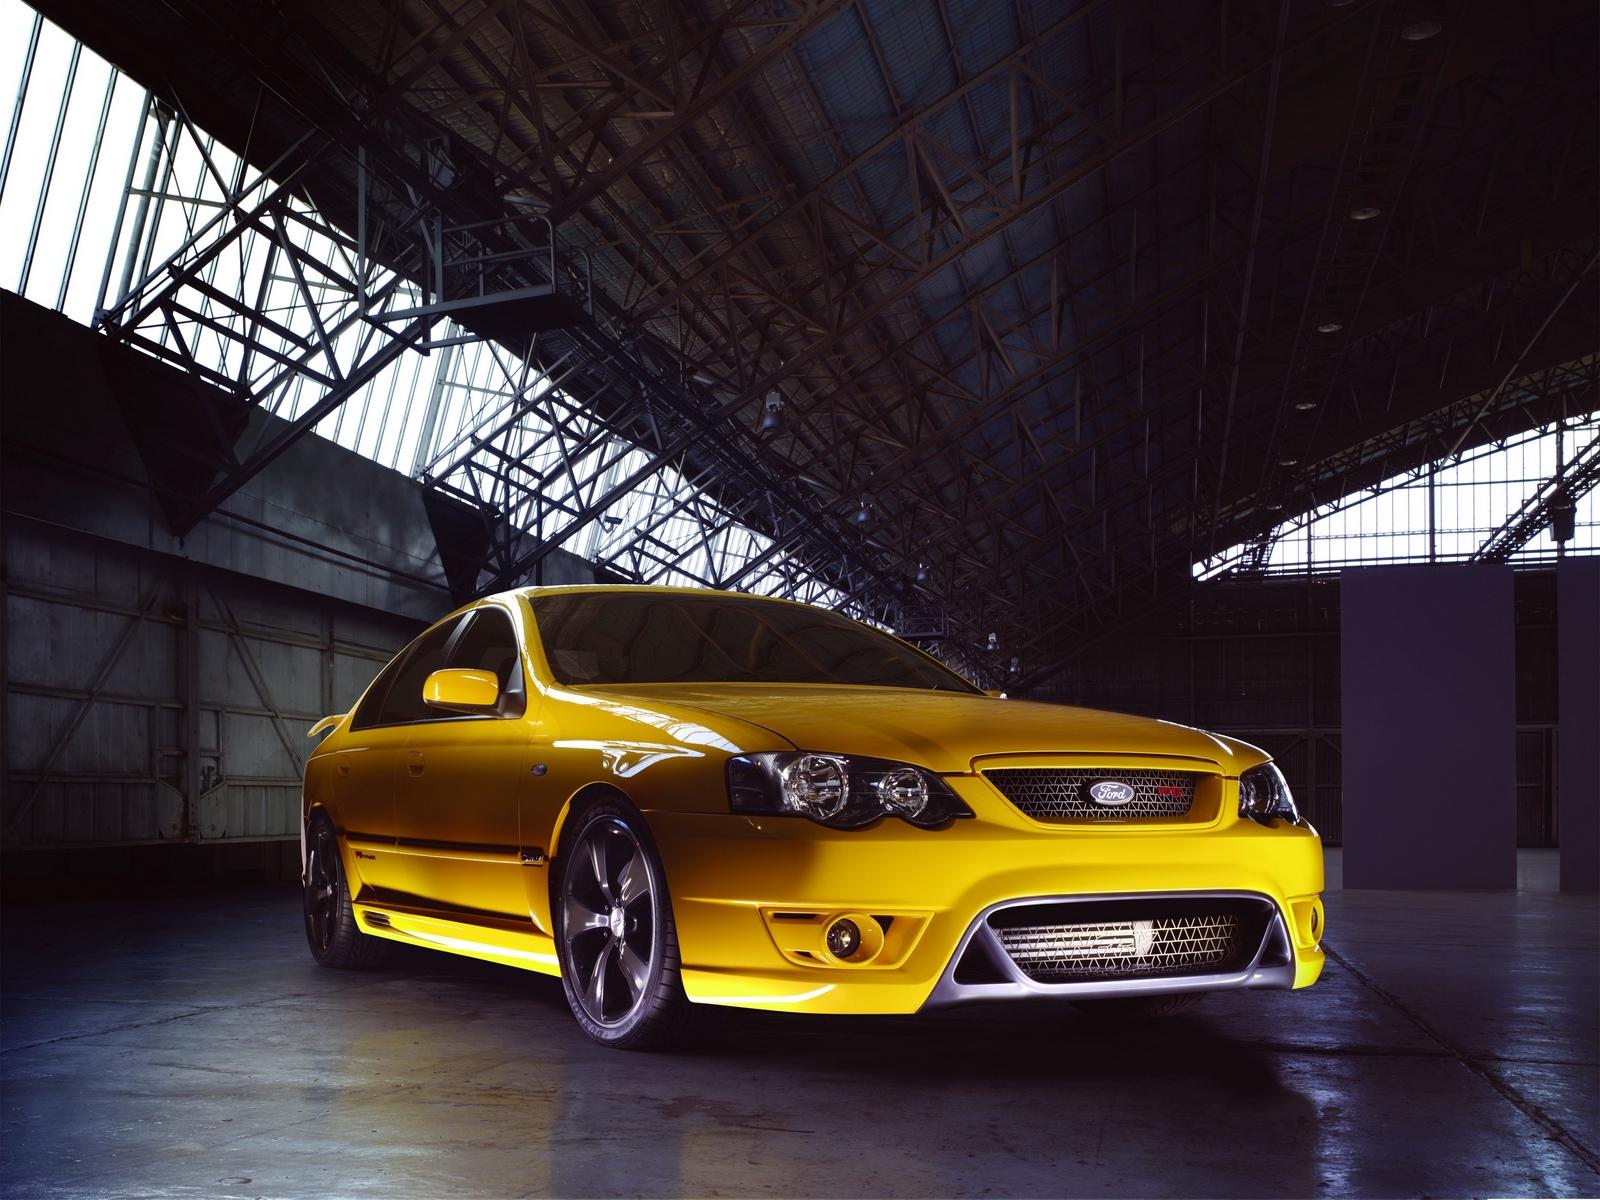 Download wallpaper 1600x1200 ford falcon, fpv, f yellow, side view